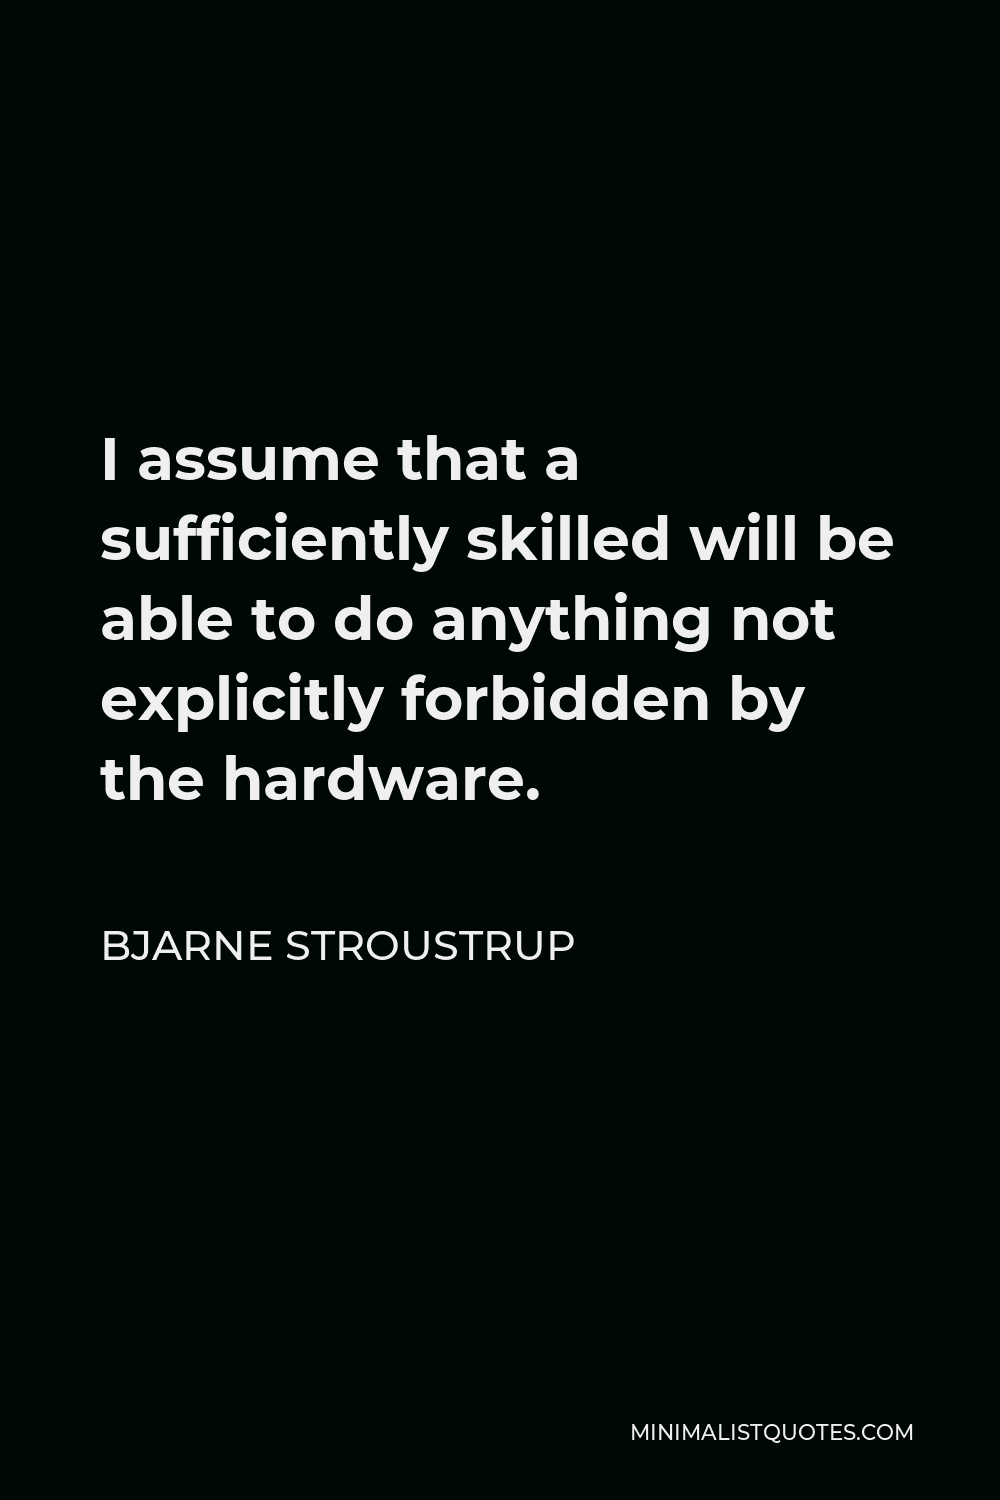 Bjarne Stroustrup Quote - I assume that a sufficiently skilled will be able to do anything not explicitly forbidden by the hardware.